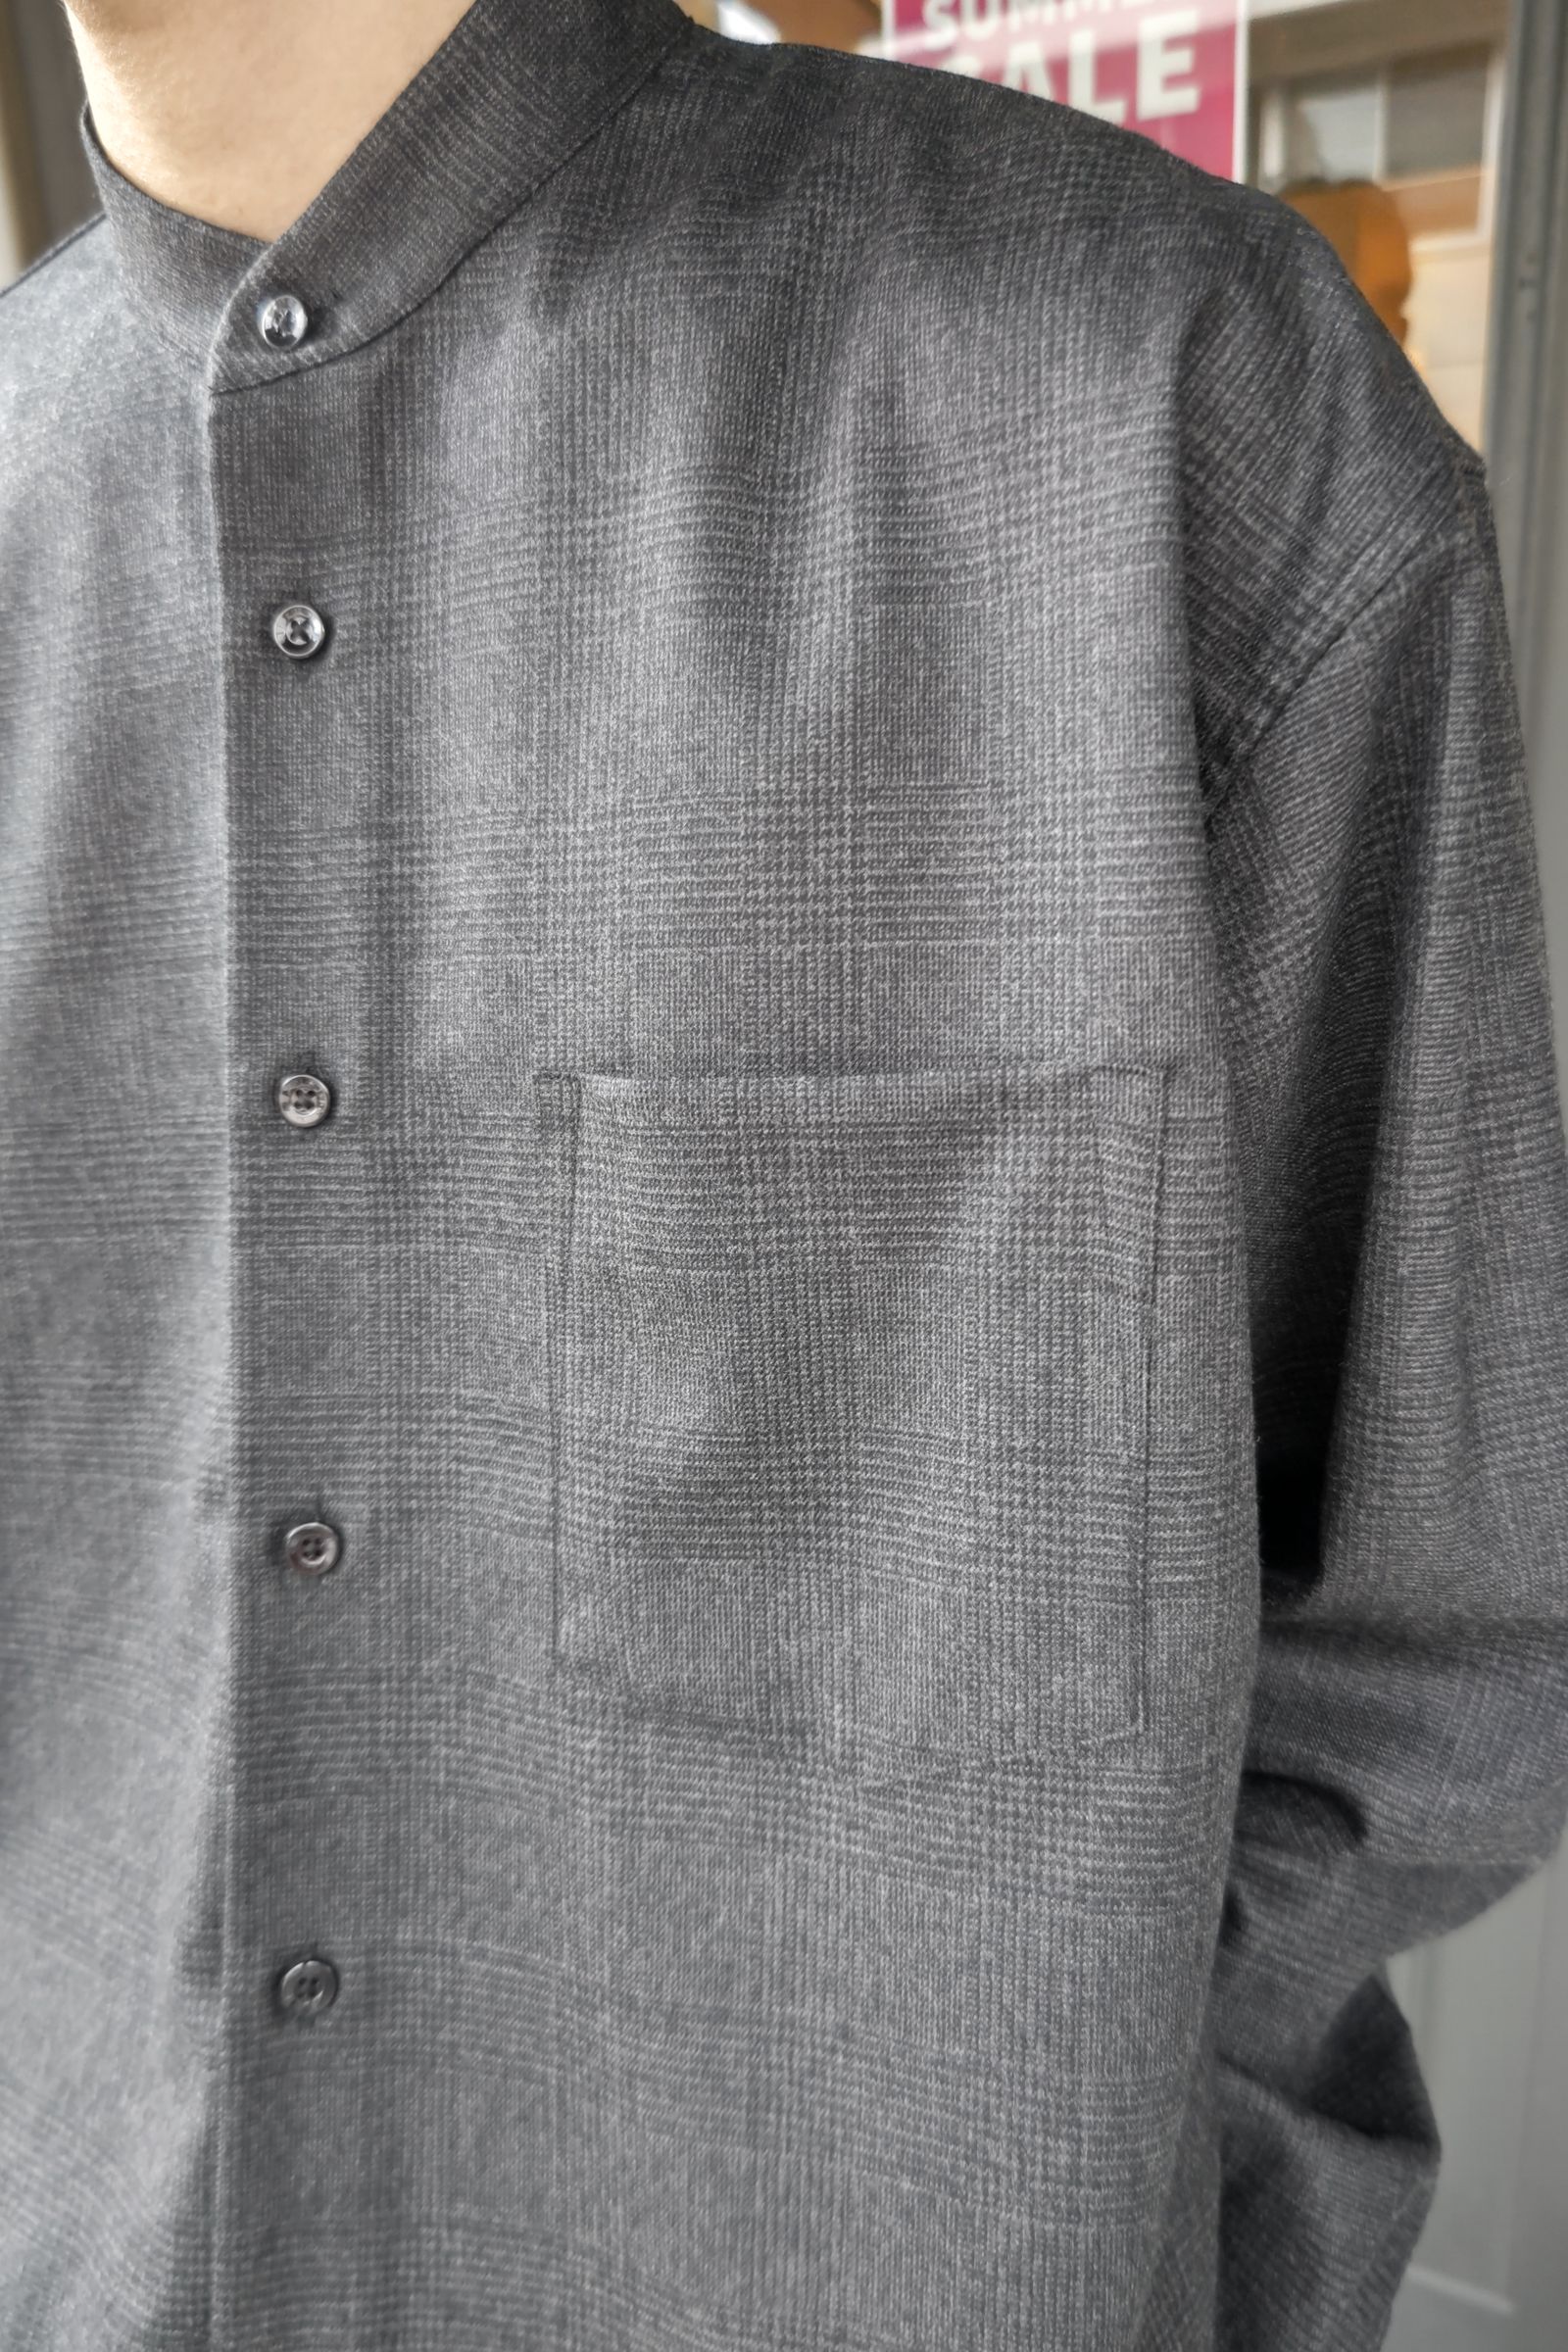 WEWILL - band collar dt shirt -c.gray- 22aw - | asterisk